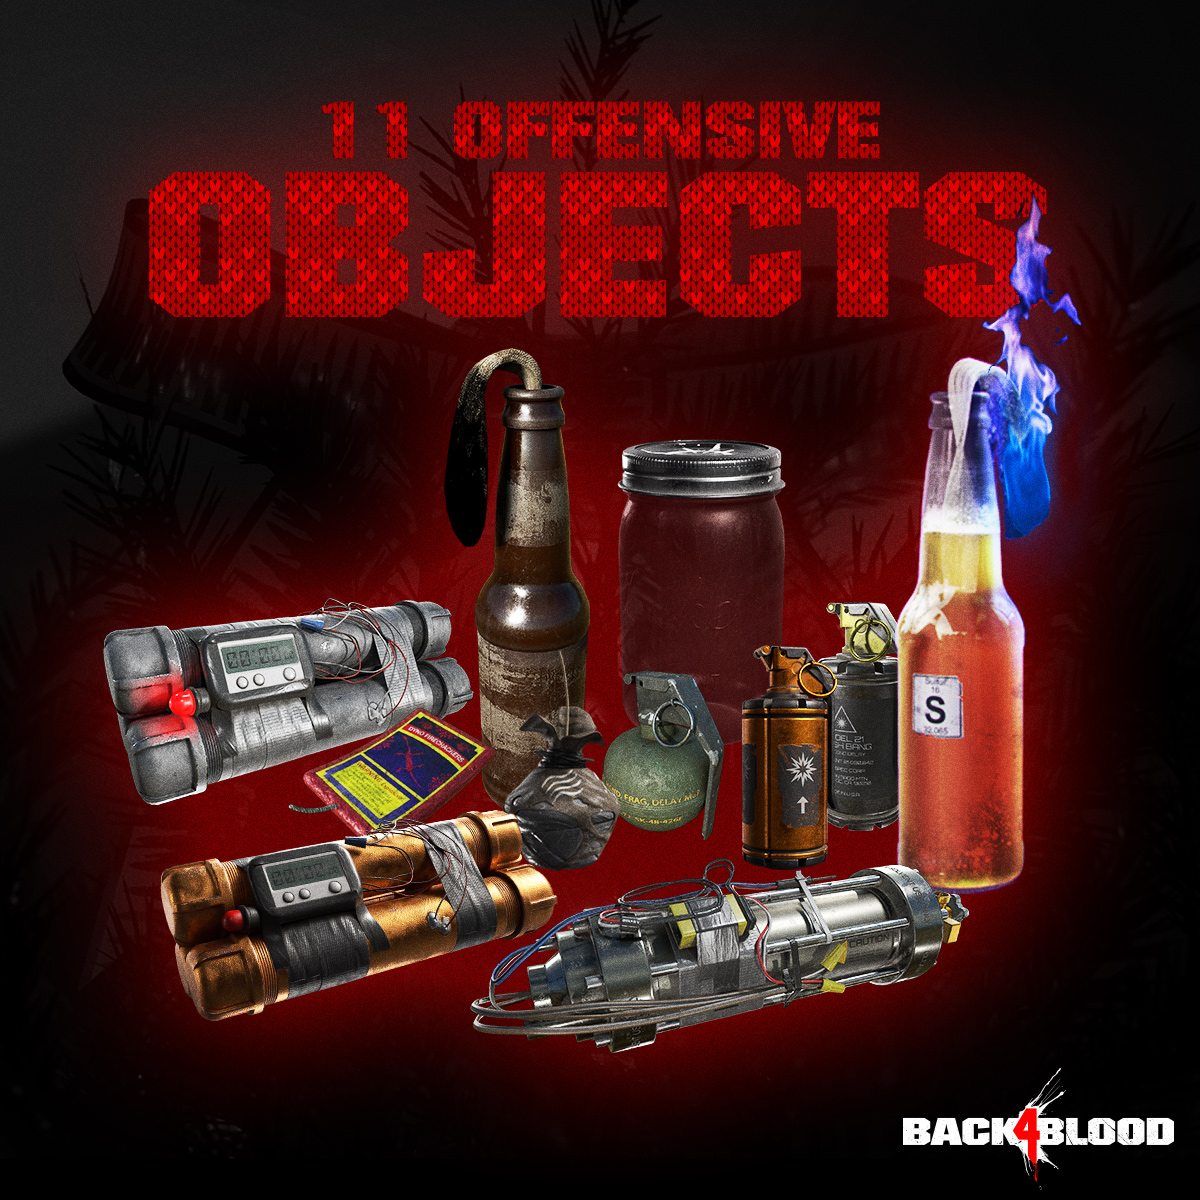 On the eleventh day of Riddenmas, Phillips gave to me: eleven offensive objects.